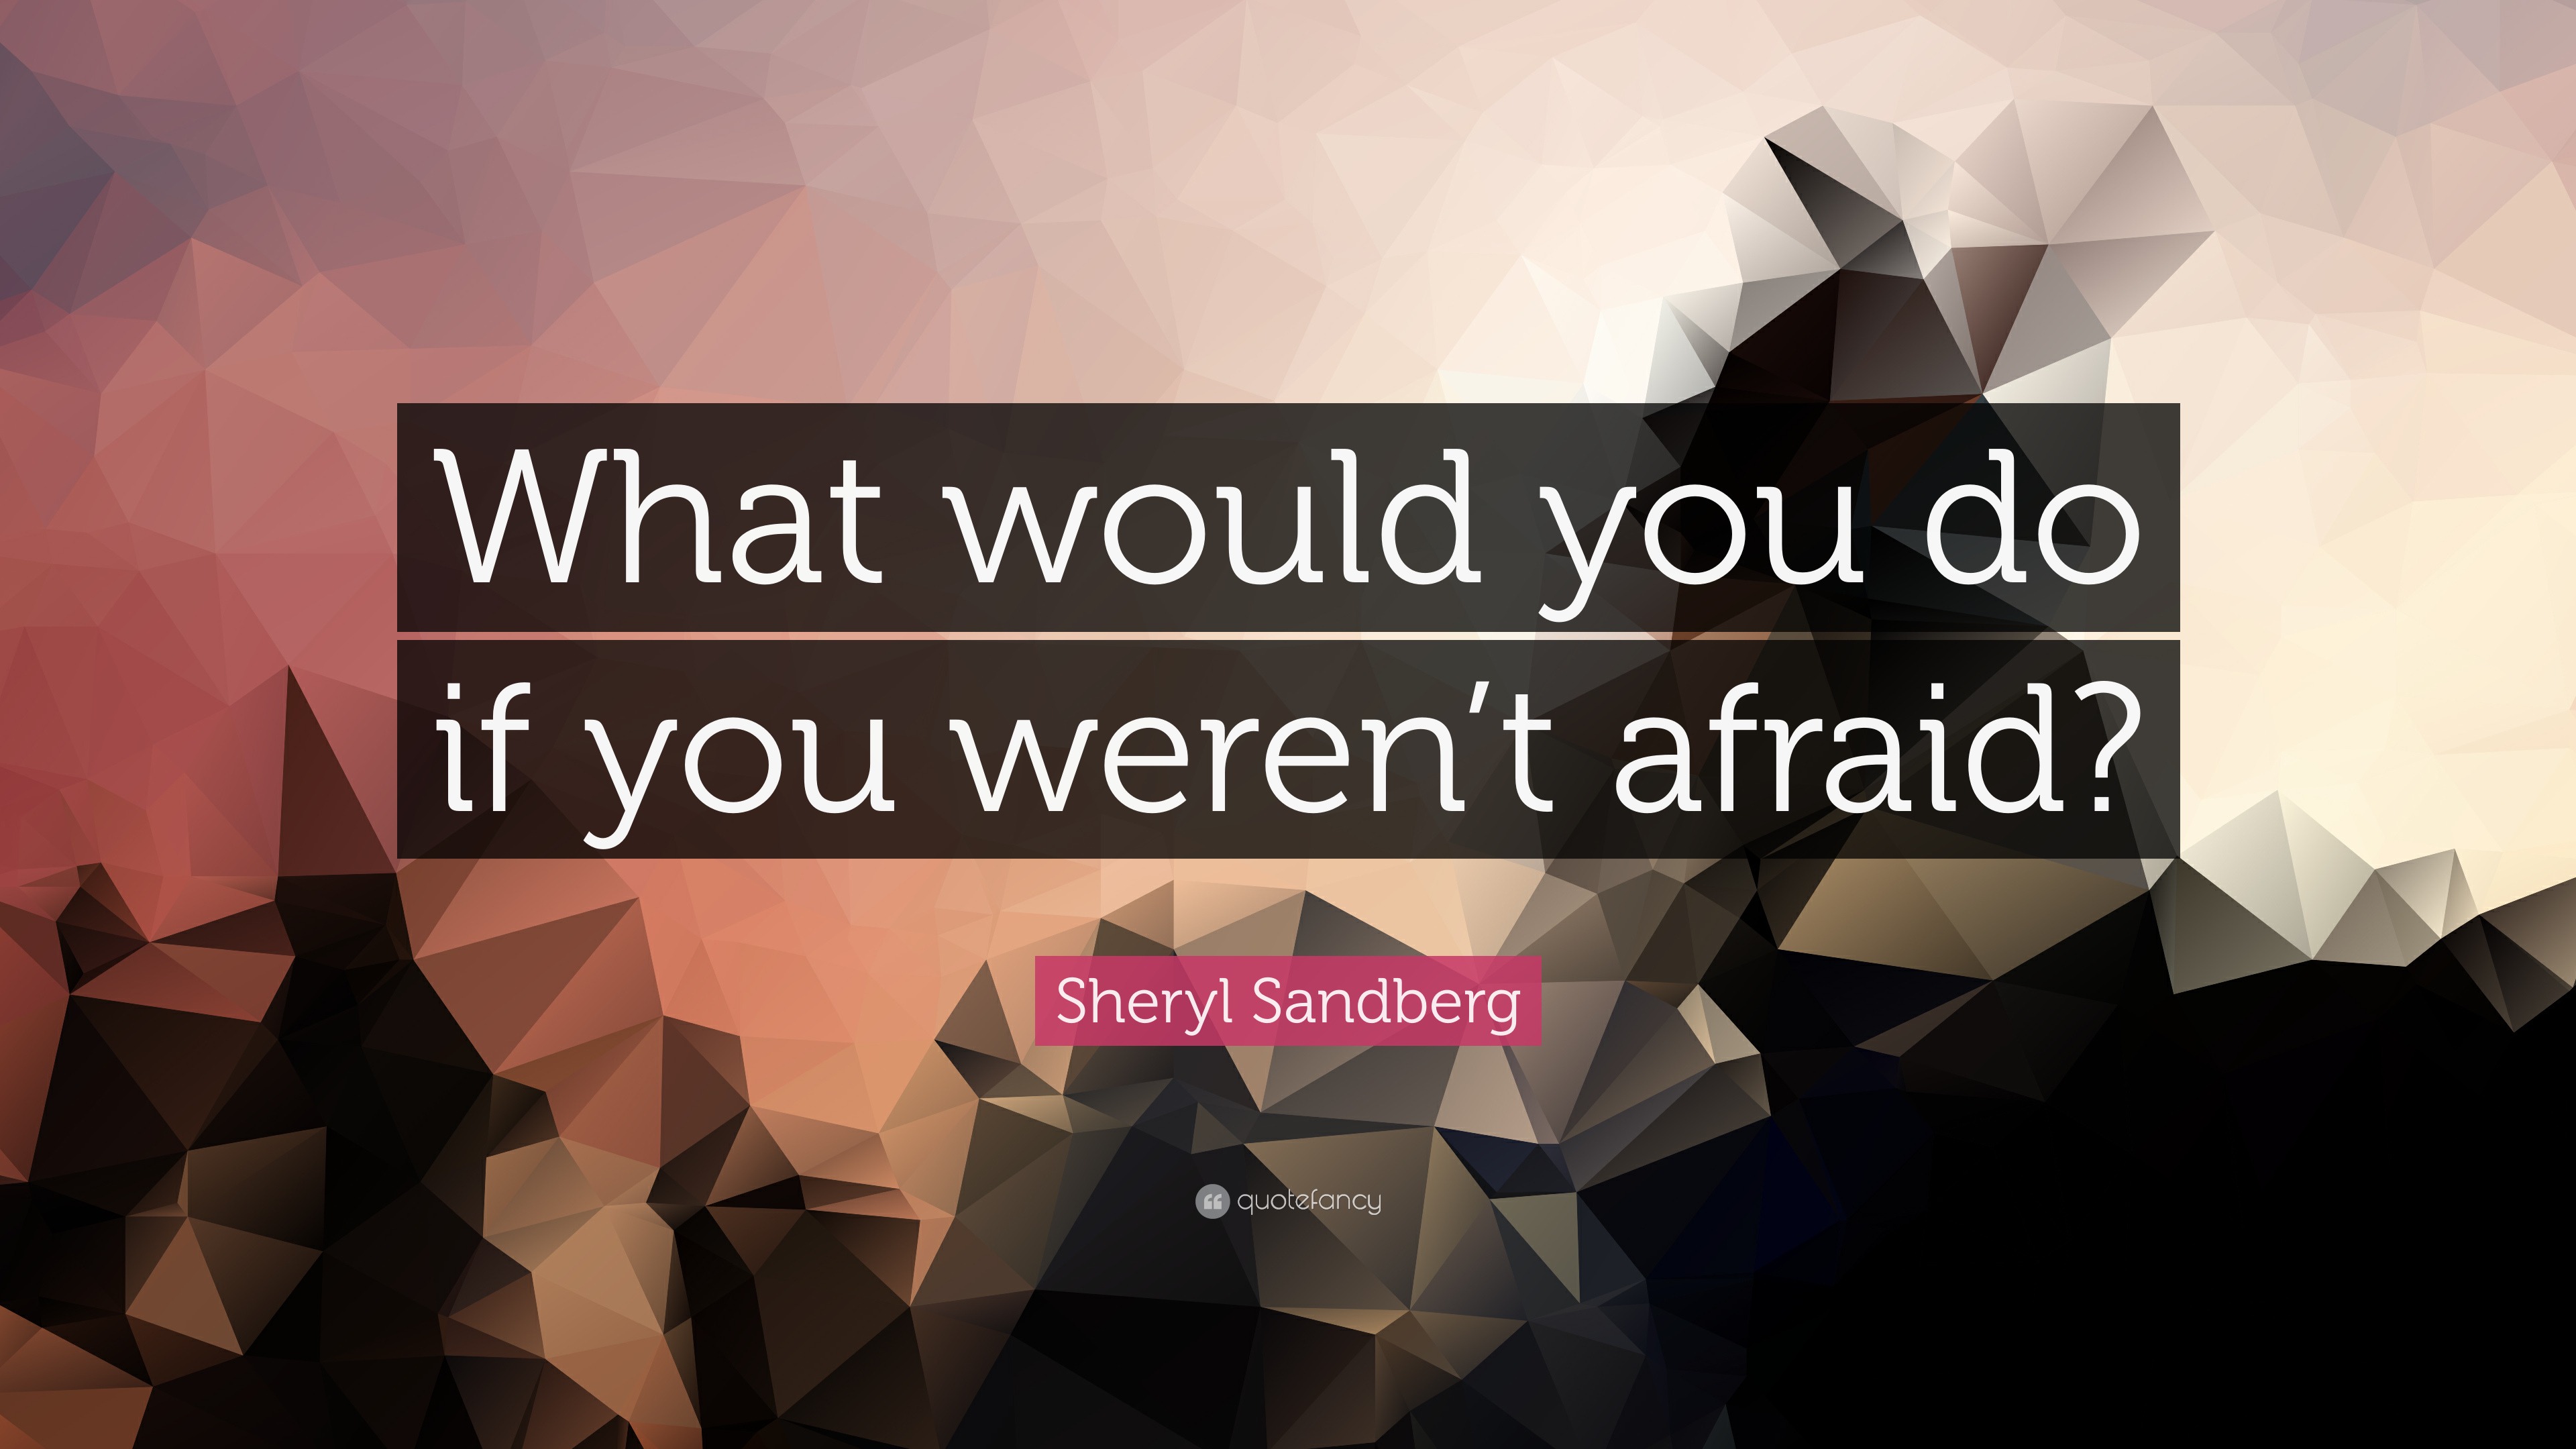 Sheryl Sandberg Quote: "What would you do if you weren't afraid?" (25 wallpapers) - Quotefancy